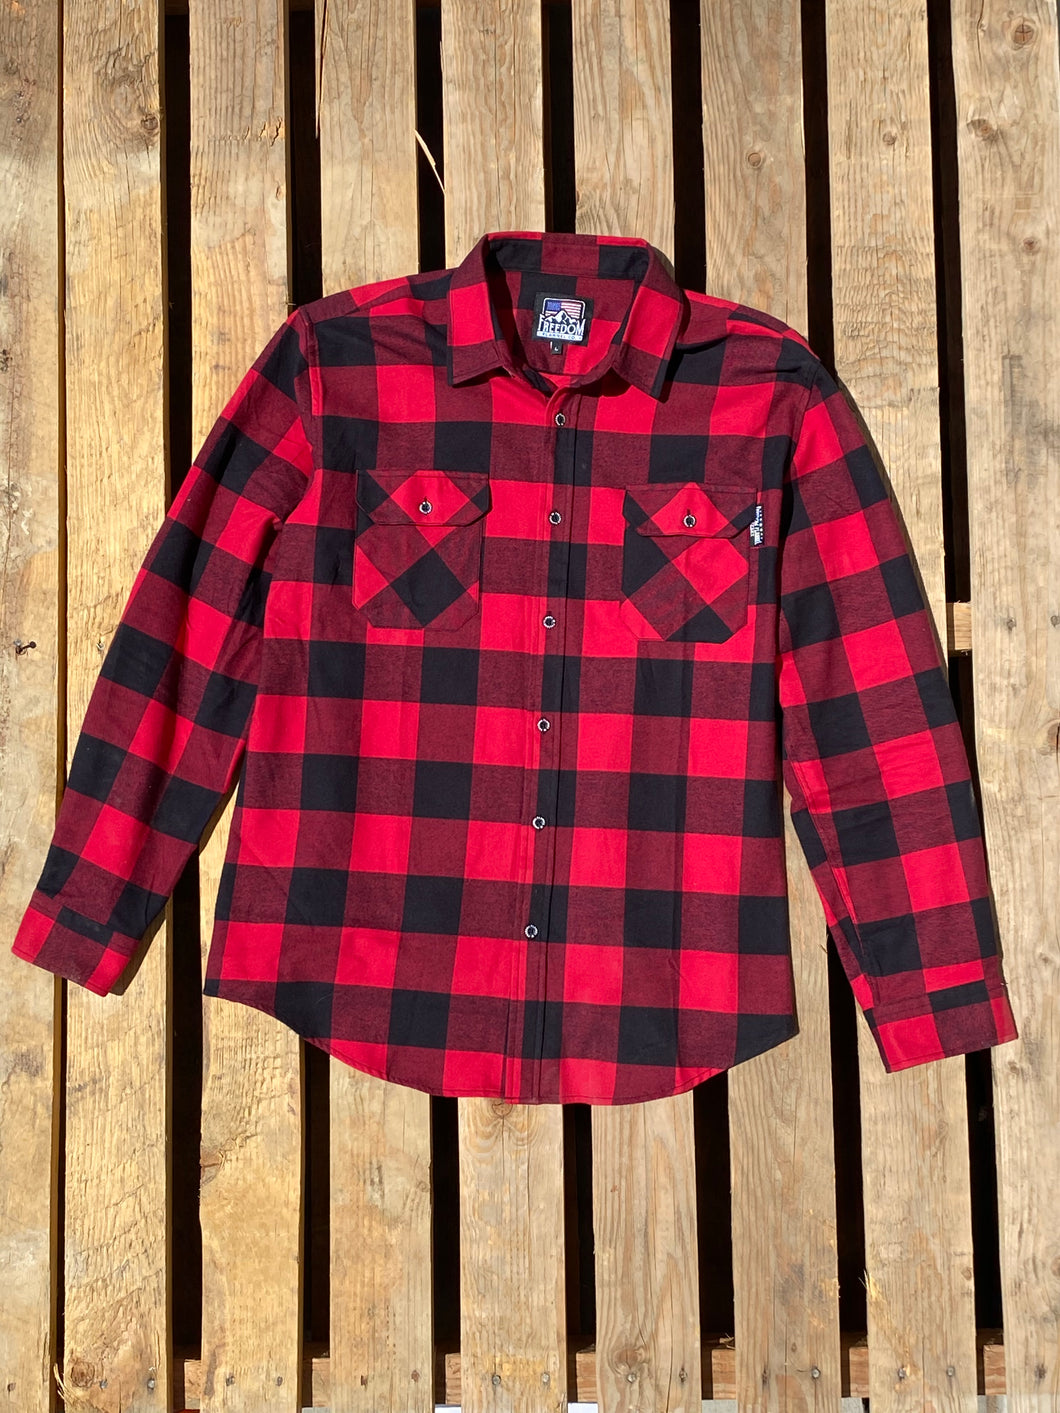 The Standard Freedom Flannel in red and black buffalo check laying on a pallet of wood. 